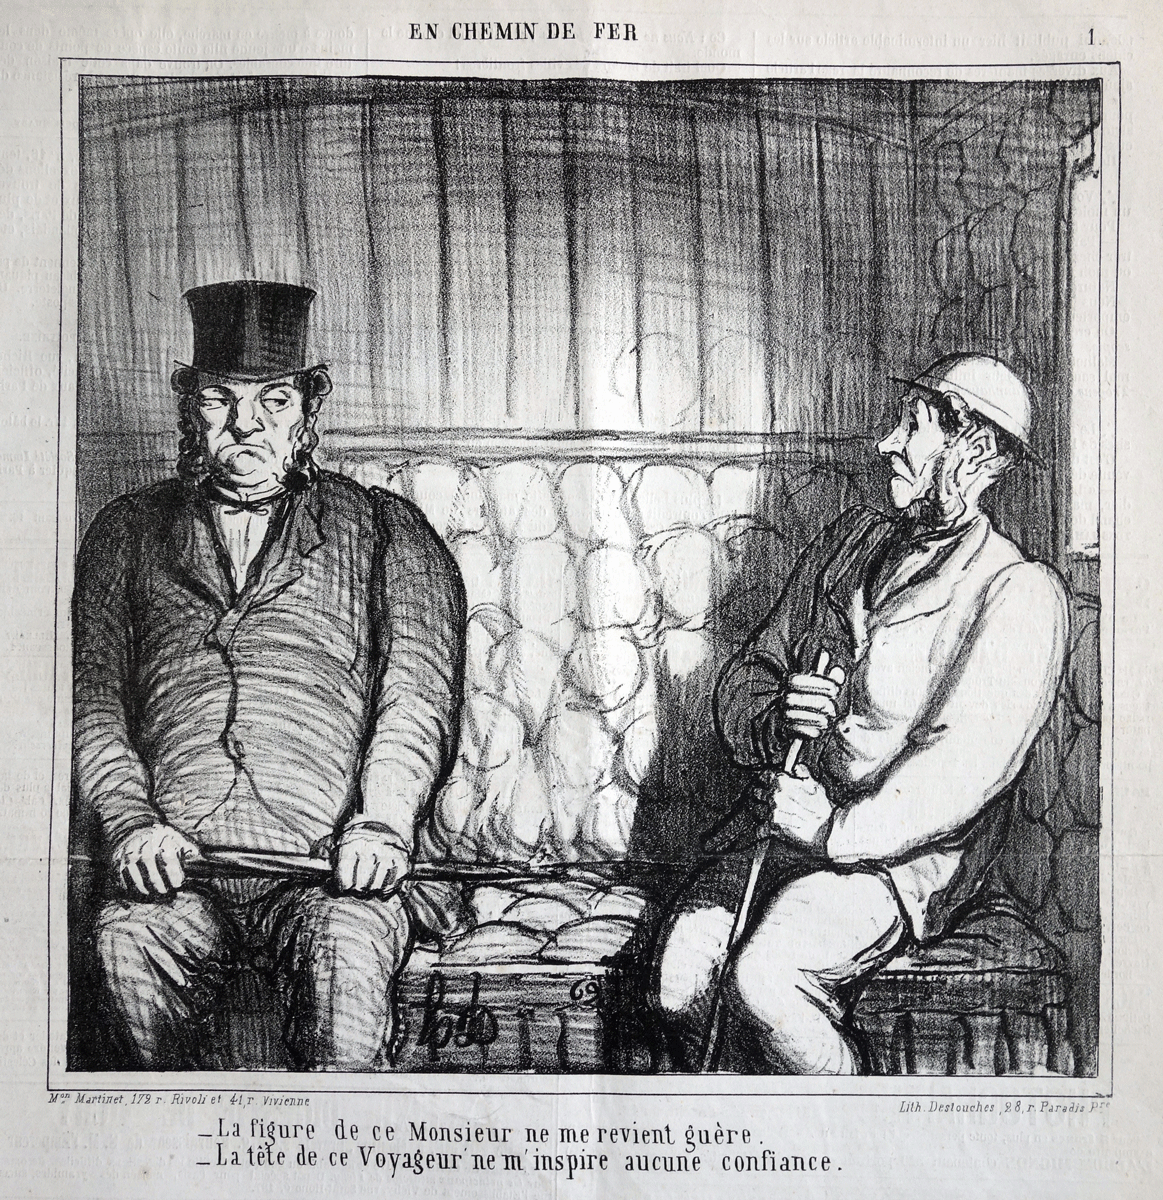 Daumier lithograph : I don't like the appearance of this gentleman at all! ‘En Chemin de Fer’